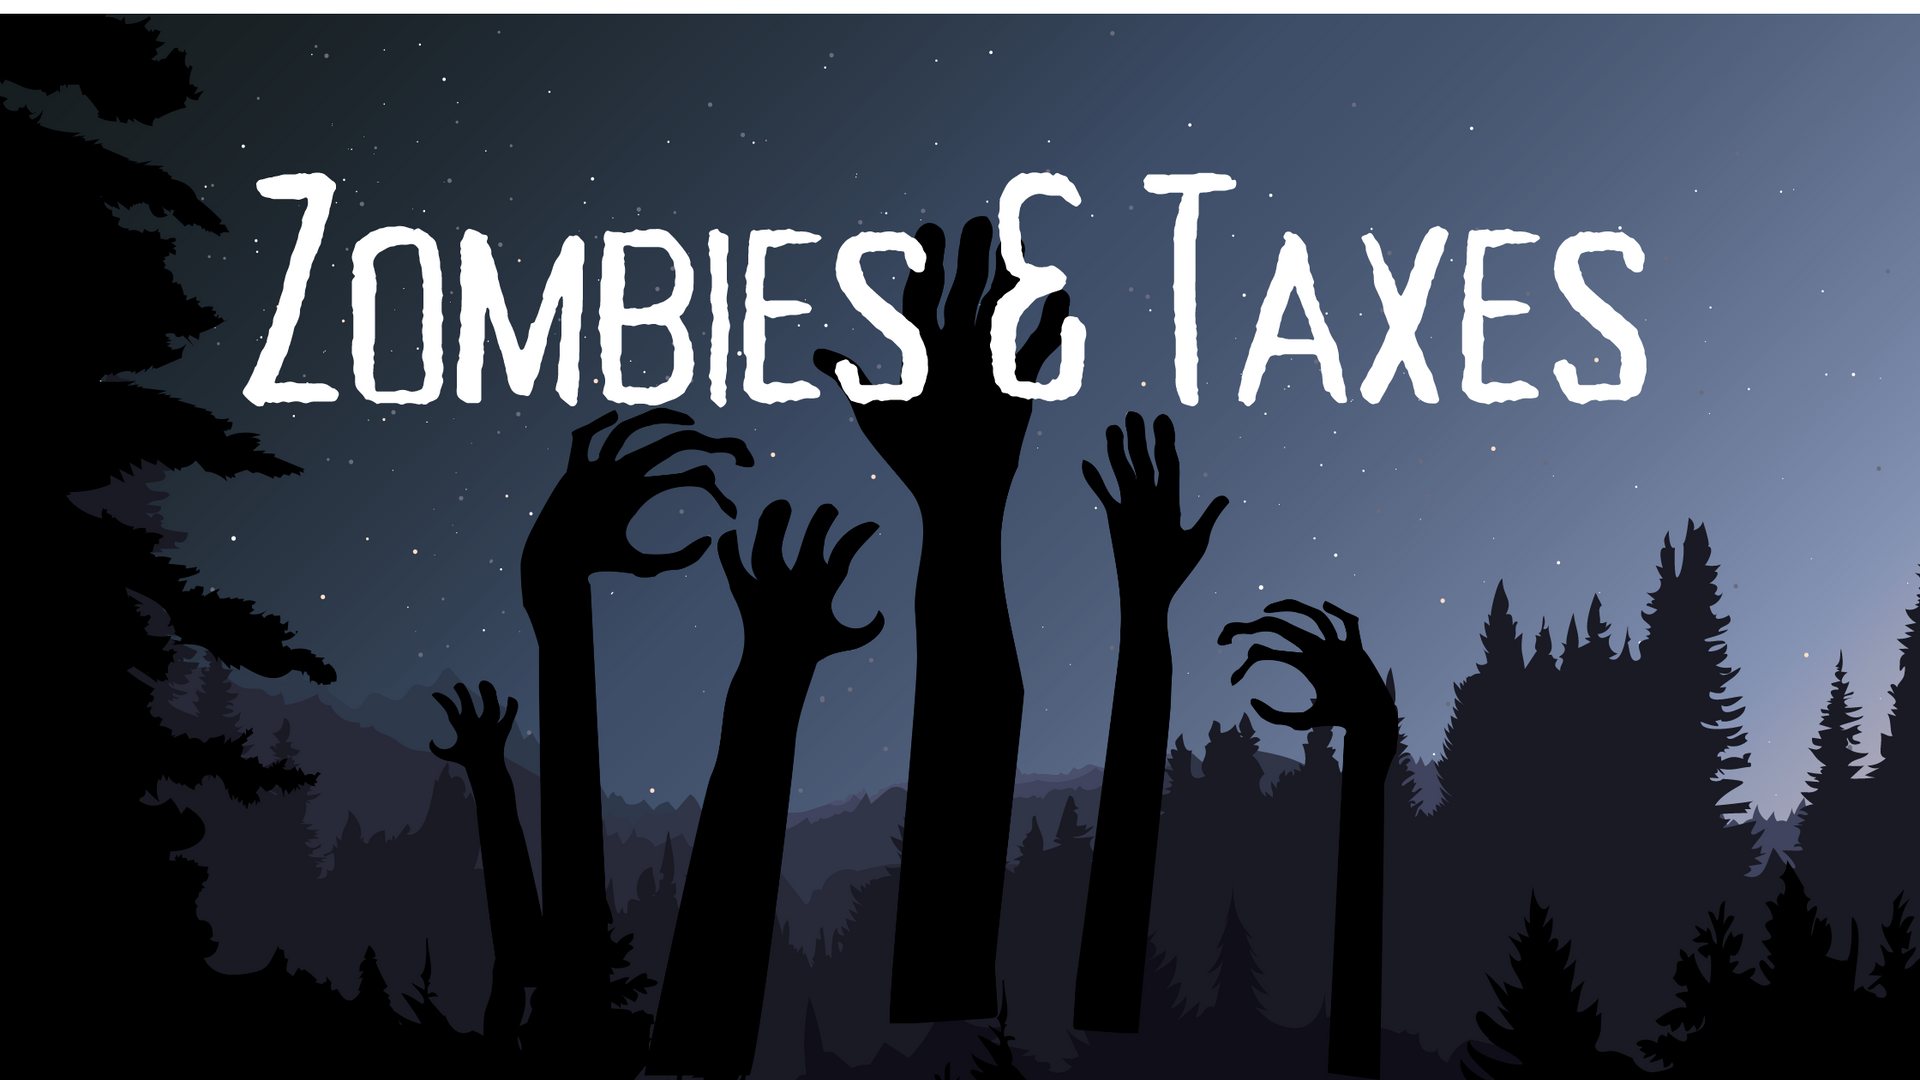 a poster that says zombies & taxes on it